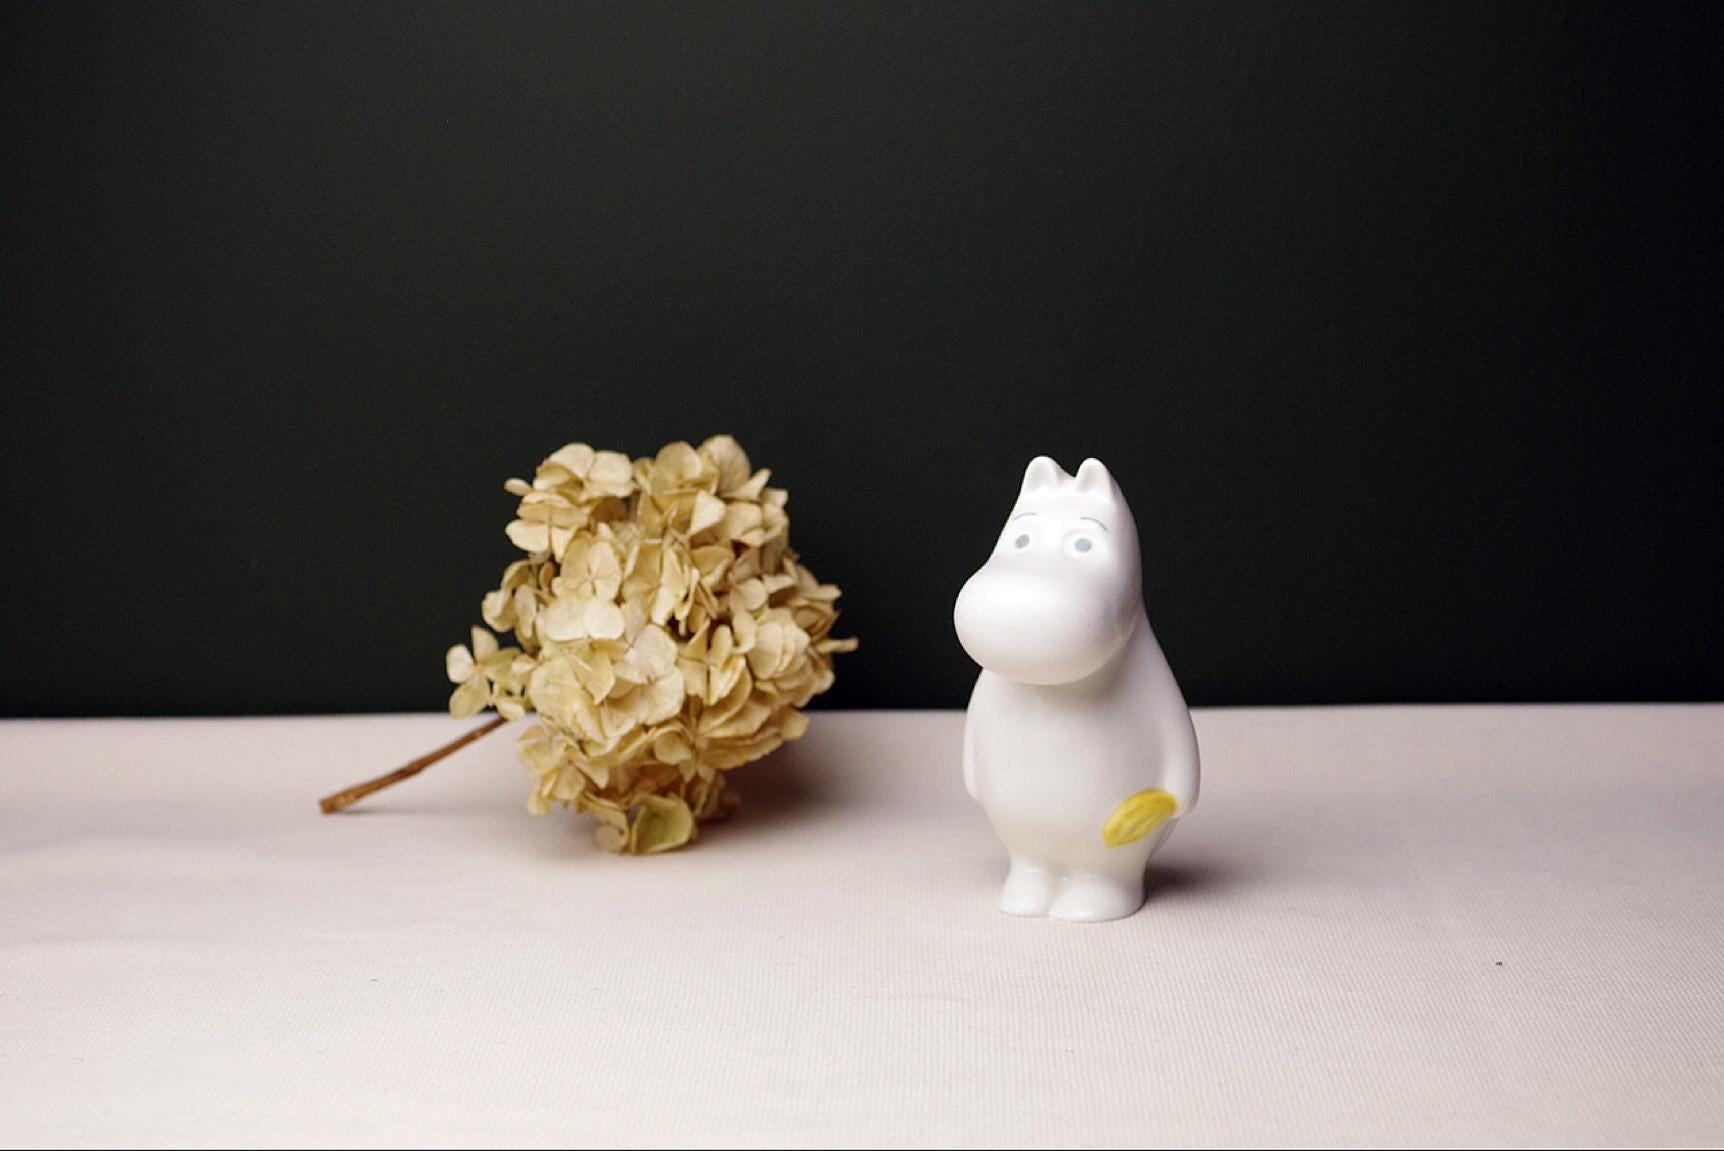 Product Description:
This Moomin figure was designed by the lifelong partner of Tove Jansson, Tuulikki Pietilä for Arabia. The figures are not in production anymore. This Moomin figure is made from porcelain and was in production from 1990 tot